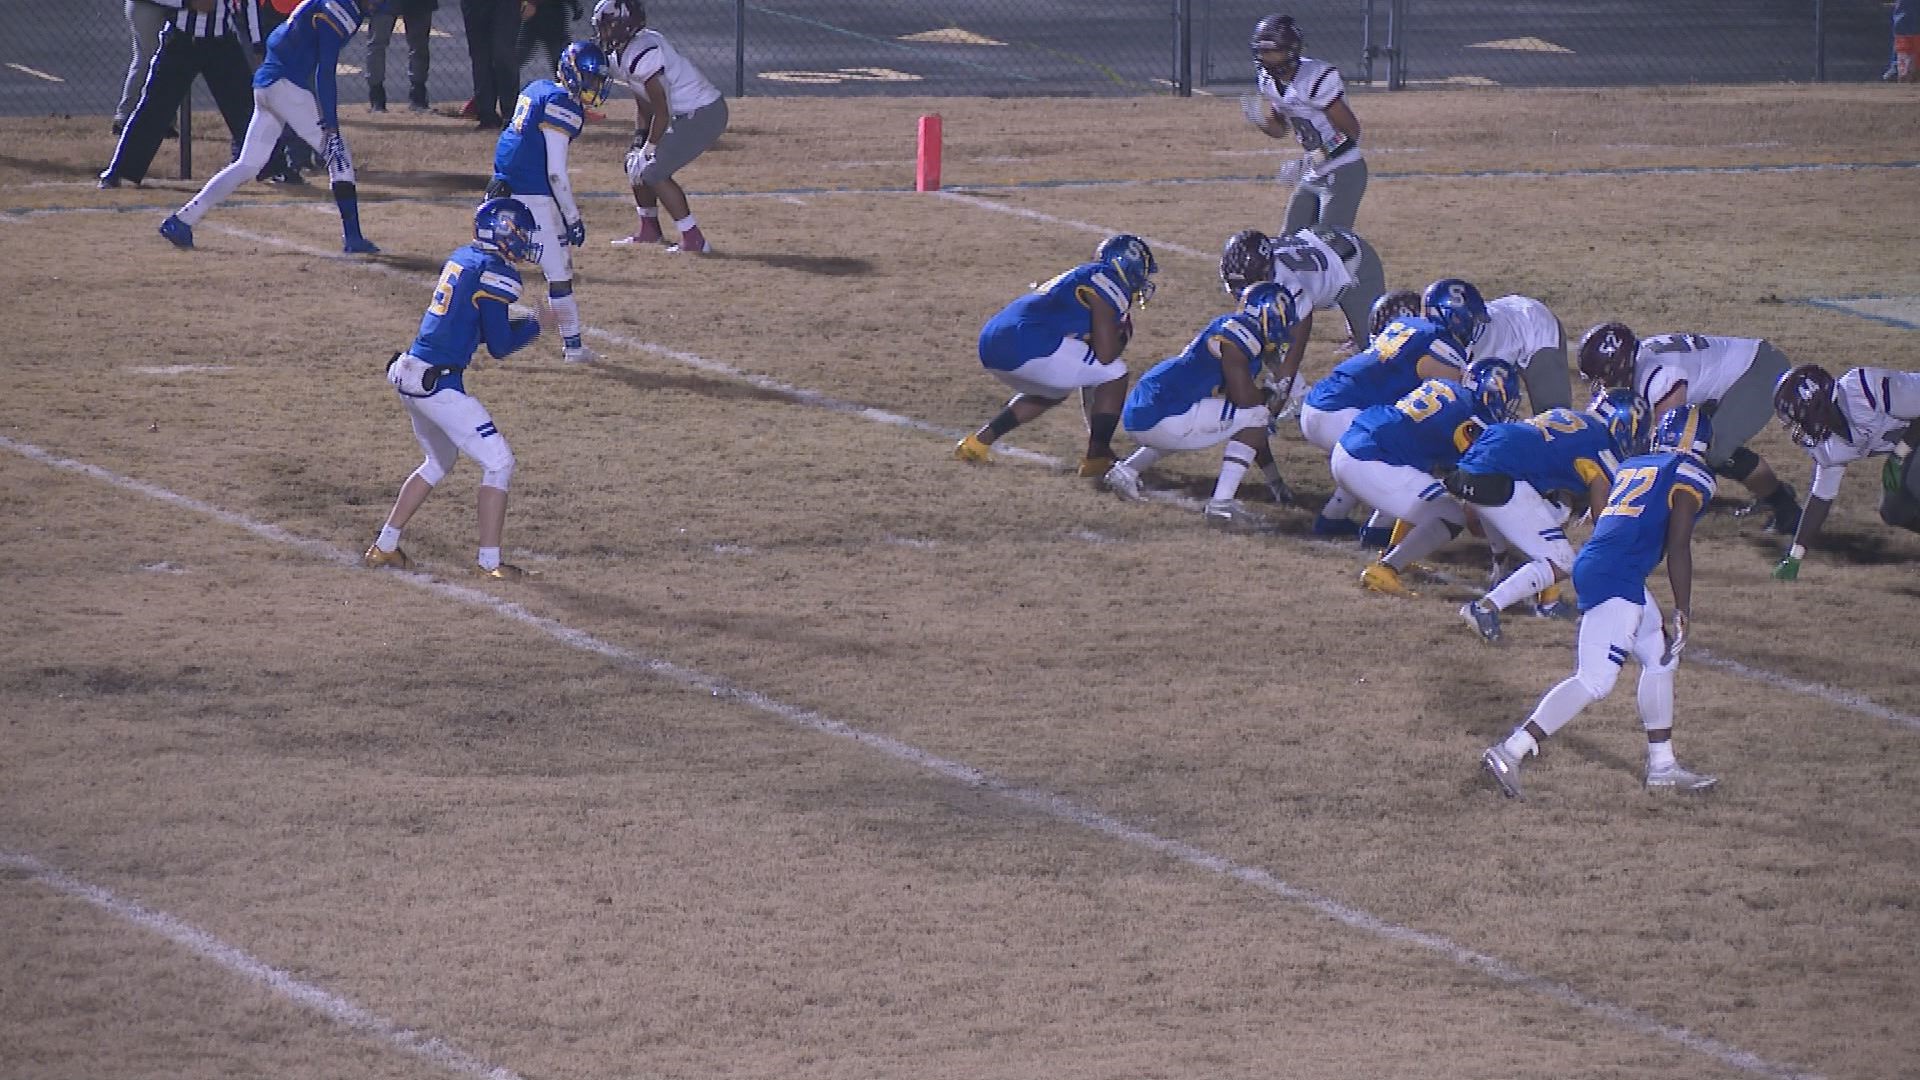 Oscar Smith running back, Romon Copeland had 3 touchdowns in the Tigers 29-7 win over Thomas Dale.